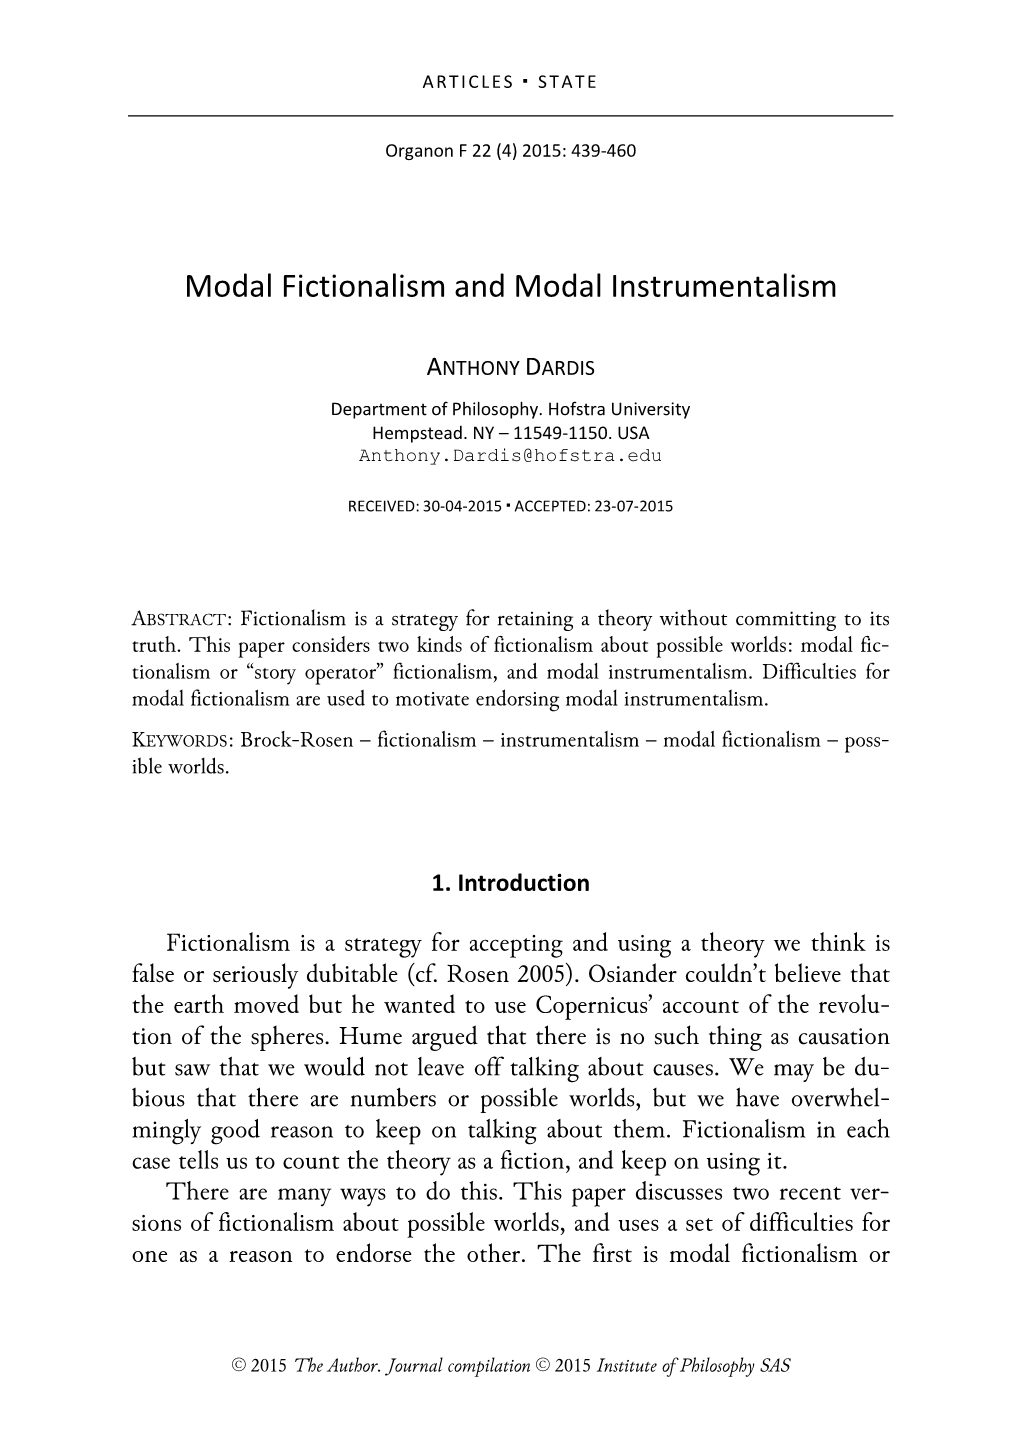 Modal Fictionalism and Modal Instrumentalism